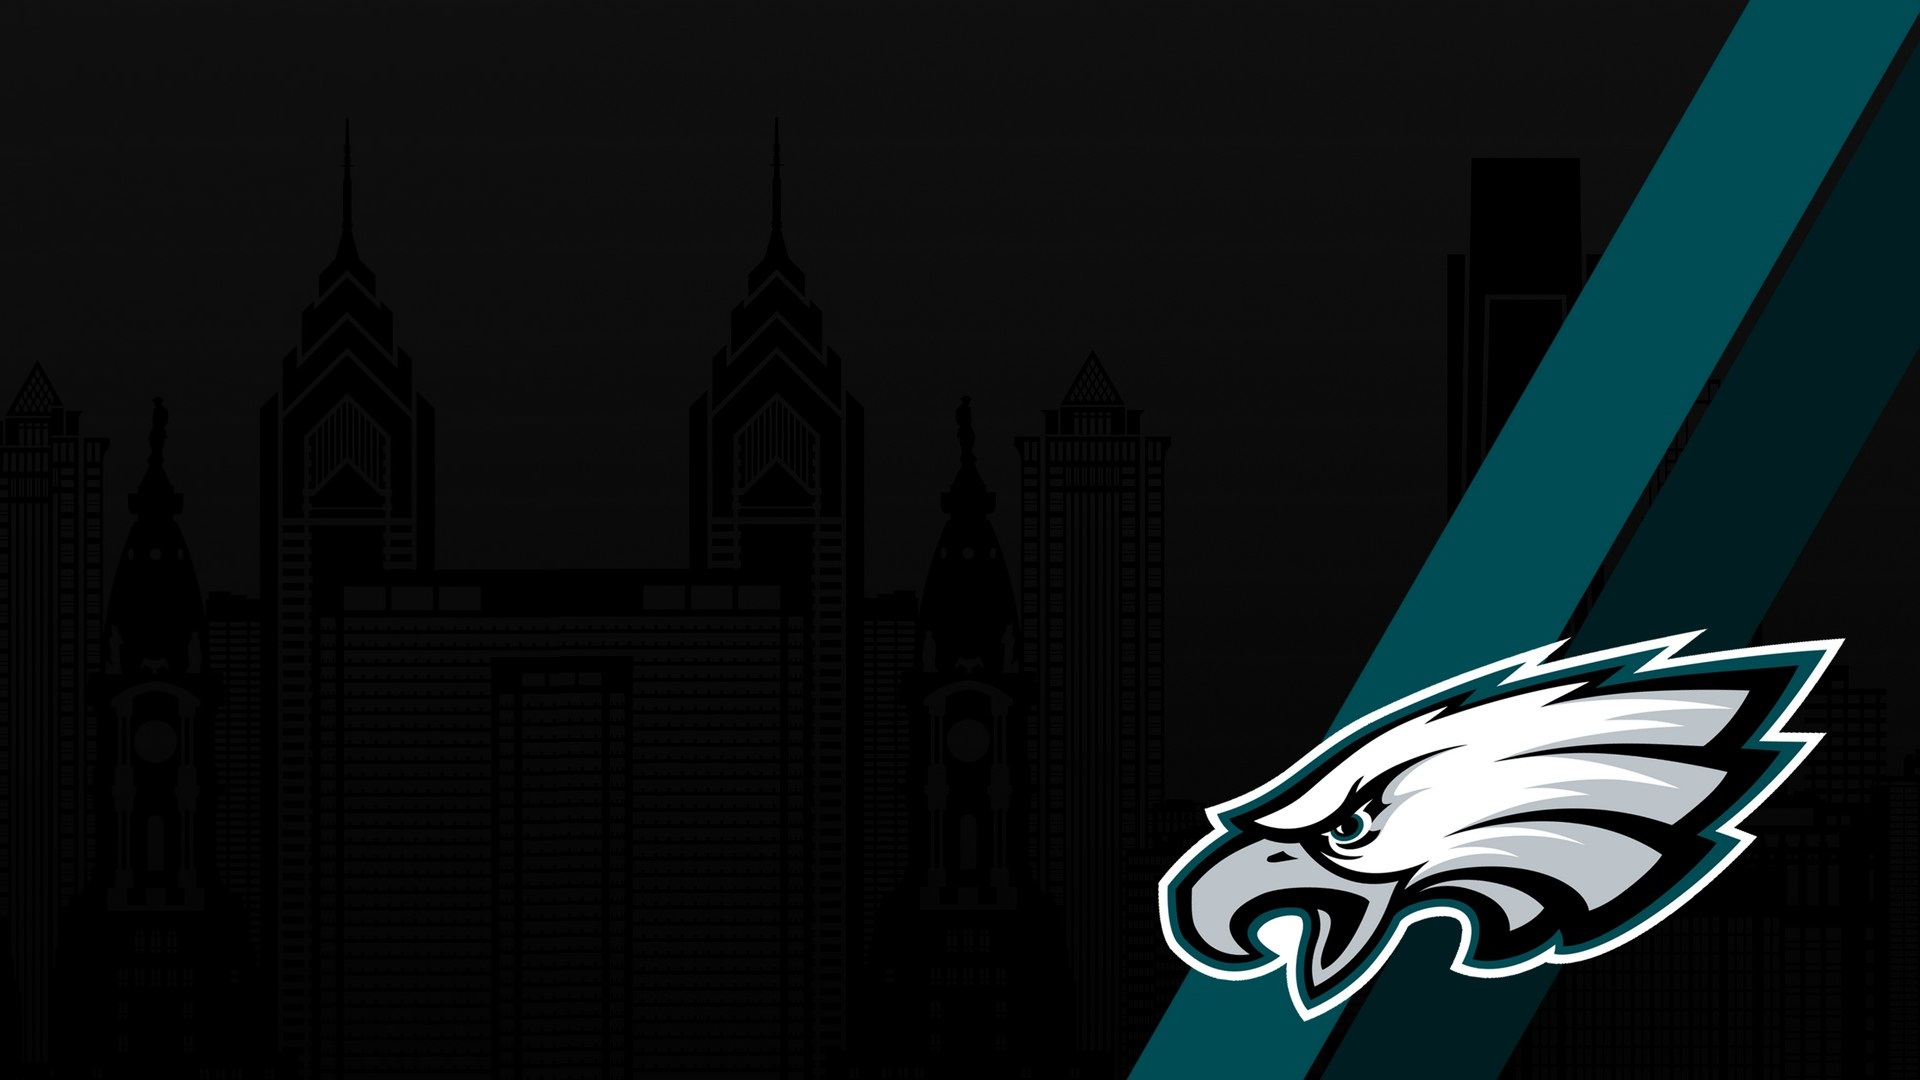 Eagles HD Wallpapers With Resolution 1920X1080 pixel. You can make this wallpaper for your Mac or Windows Desktop Background, iPhone, Android or Tablet and another Smartphone device for free